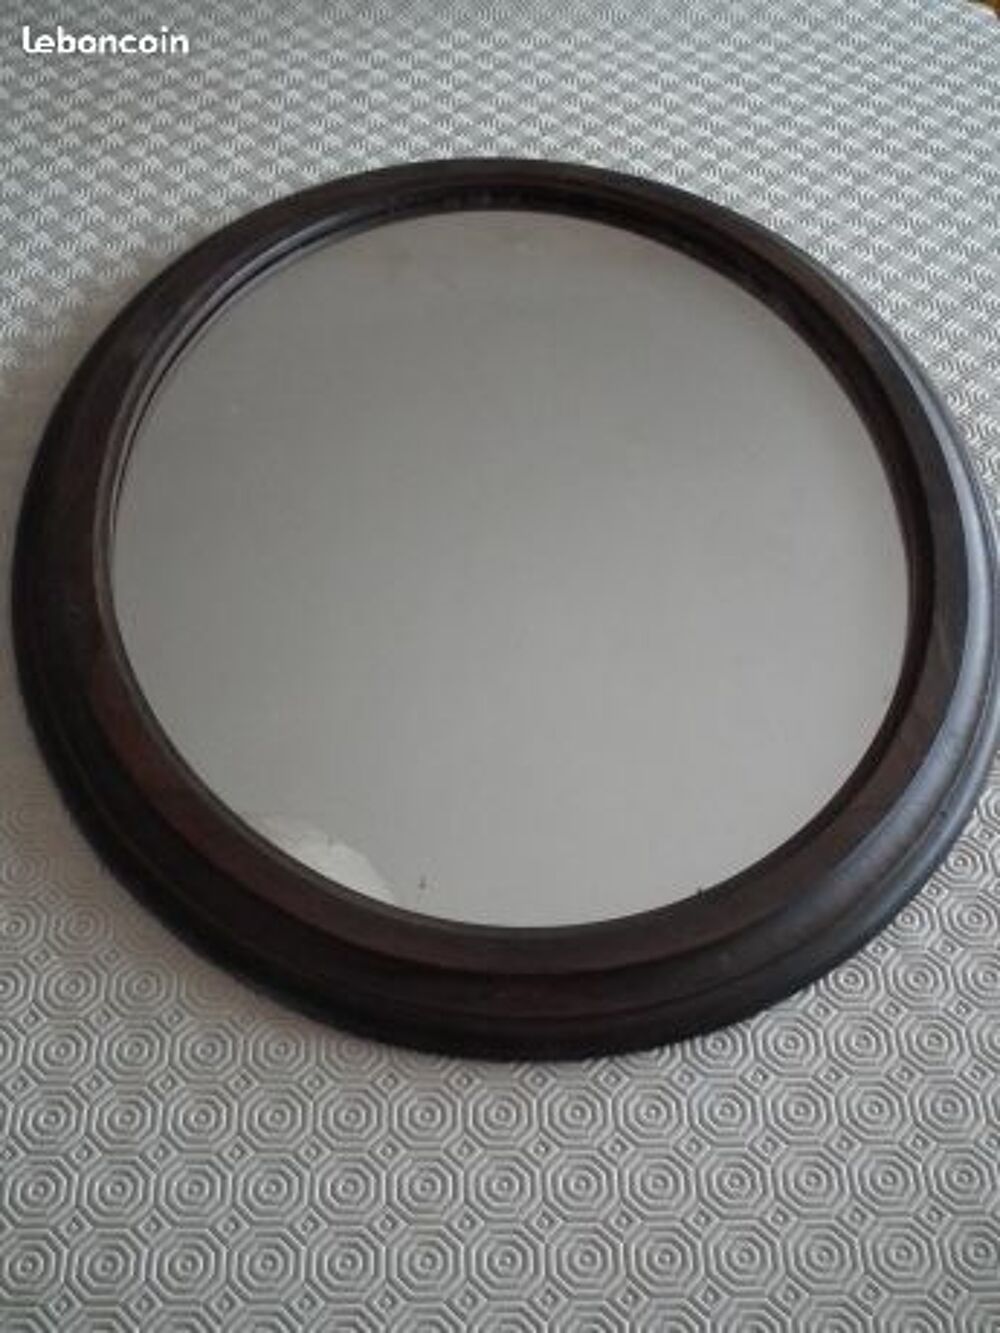 Vends 3 miroirs (rond, oval, octogonal) Dcoration